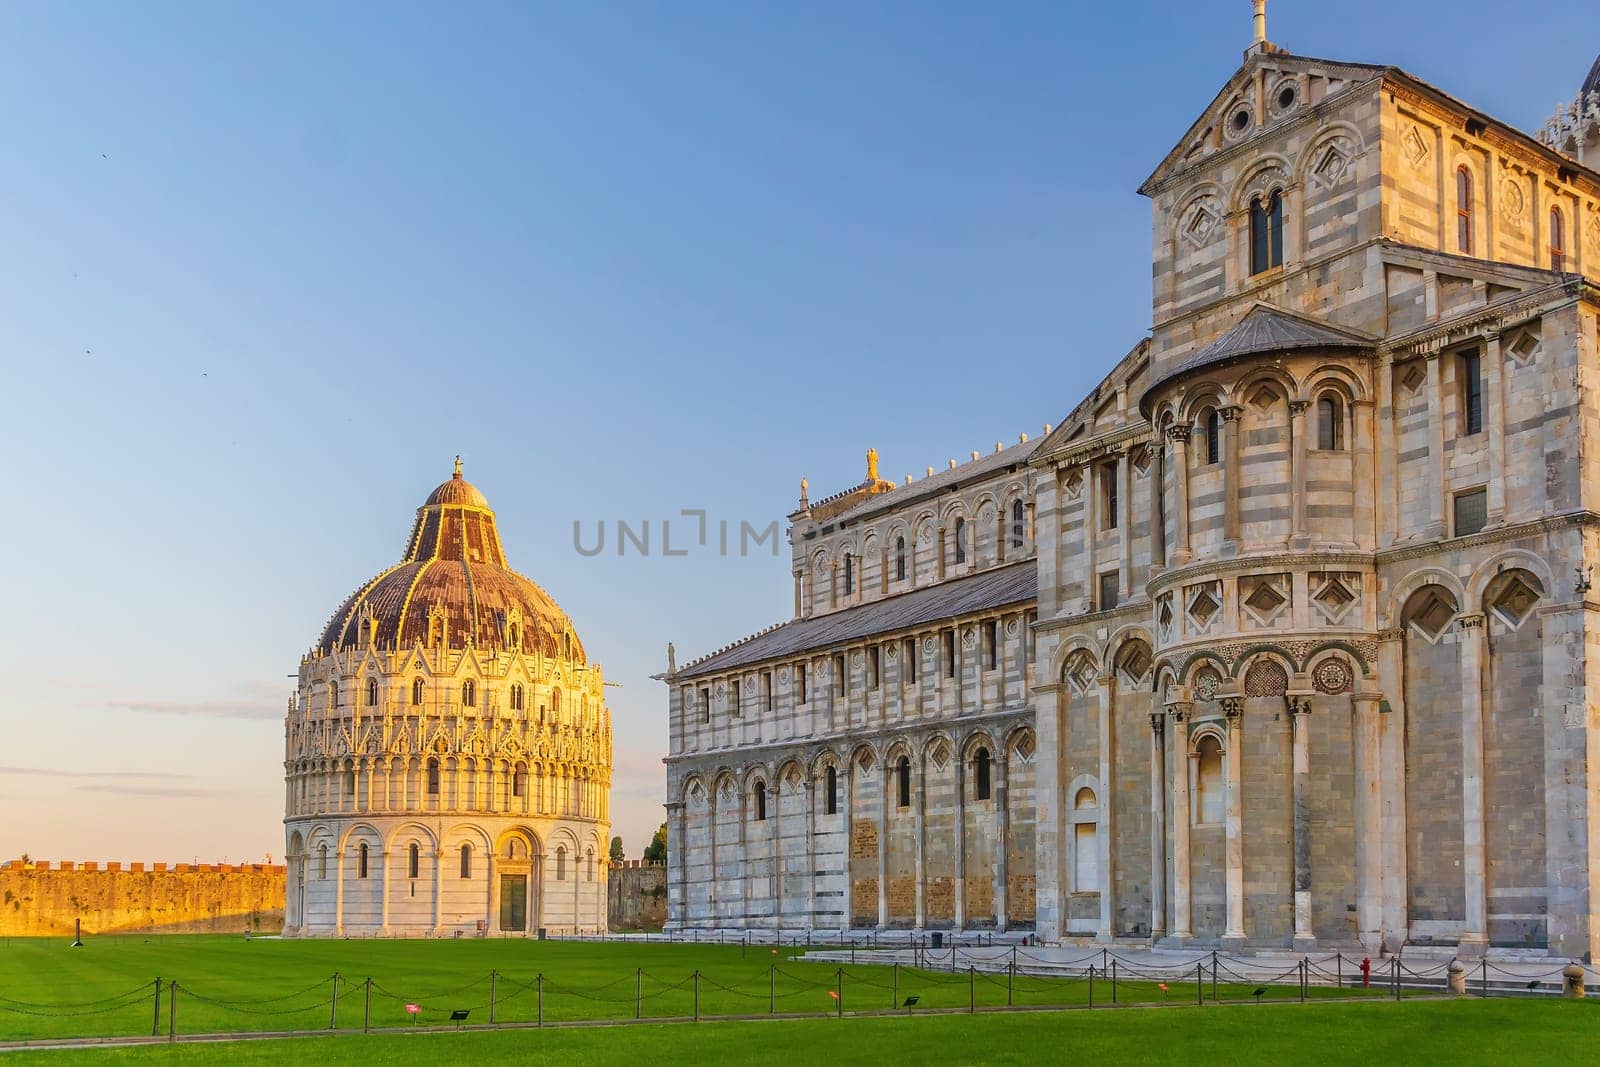 The famous Leaning Tower in Pisa, Italy by f11photo